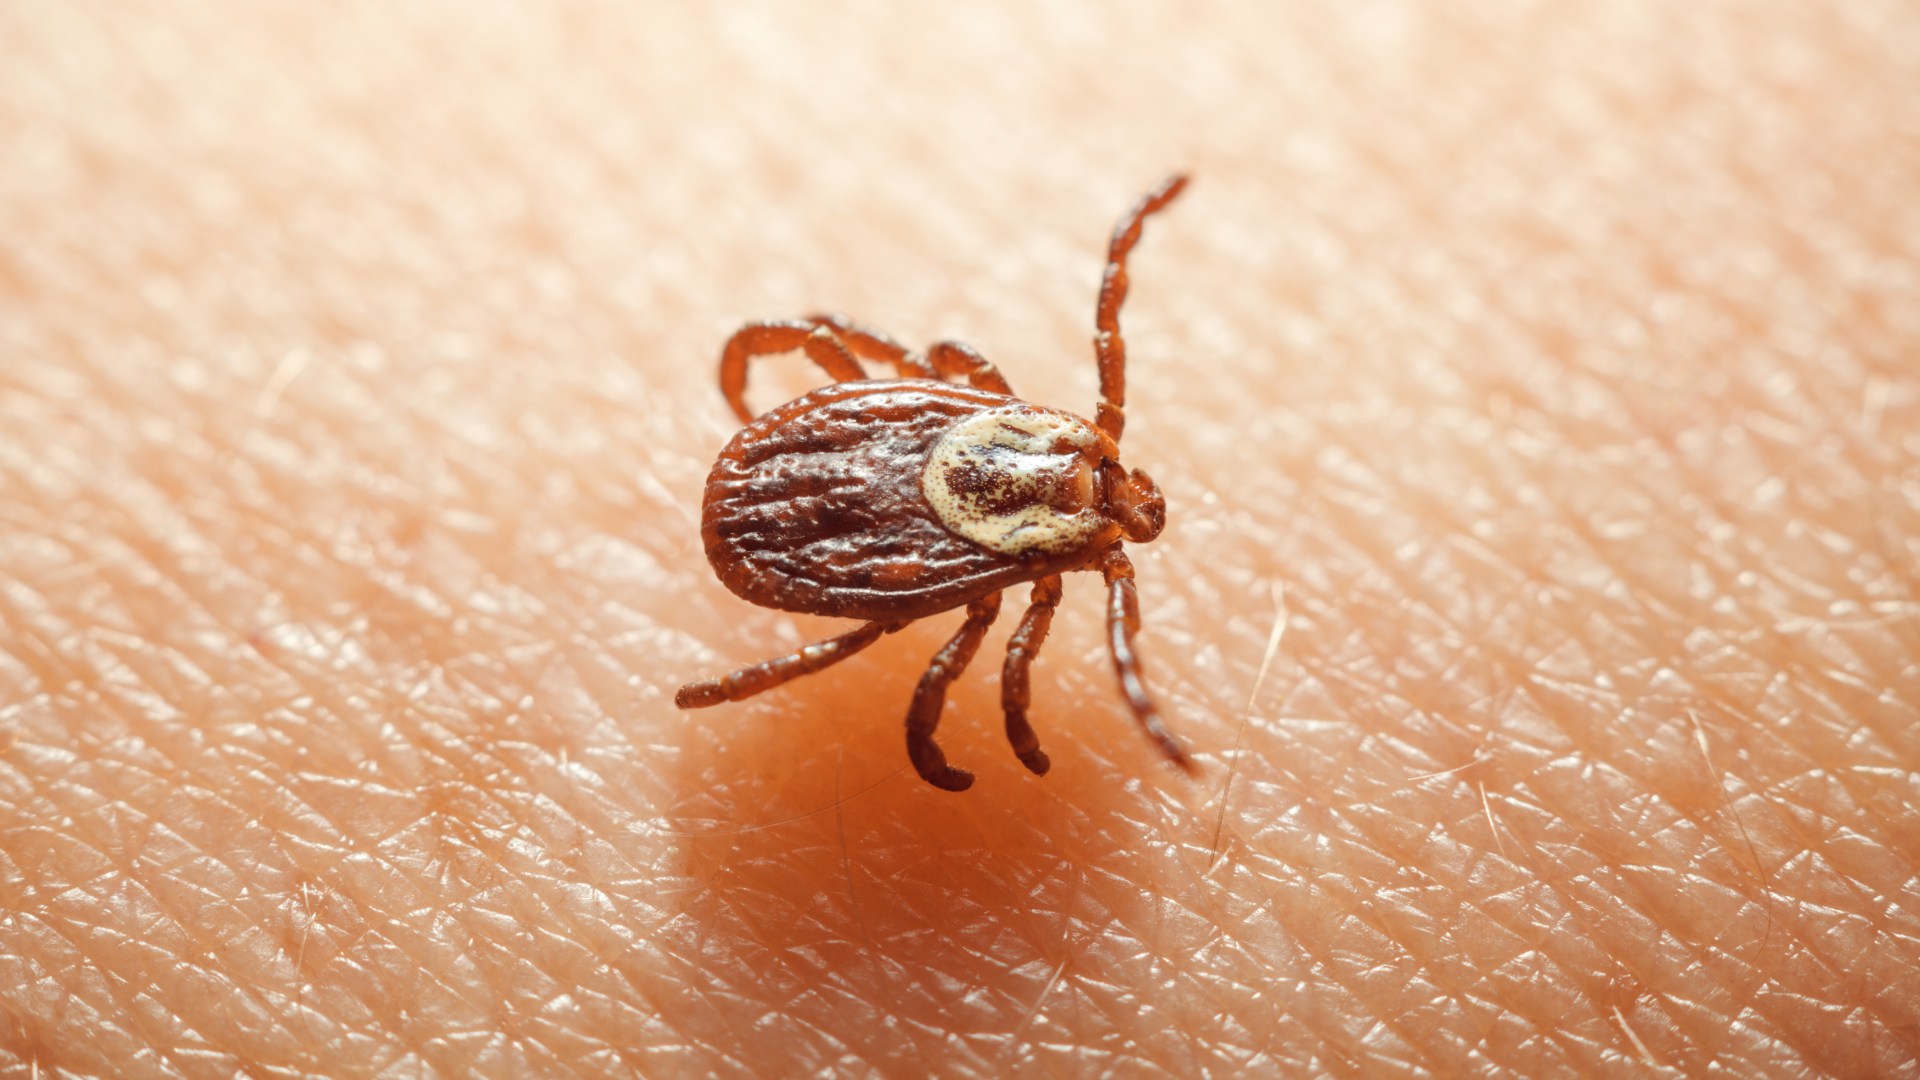 Tick found on home owner in Fishers, IN.